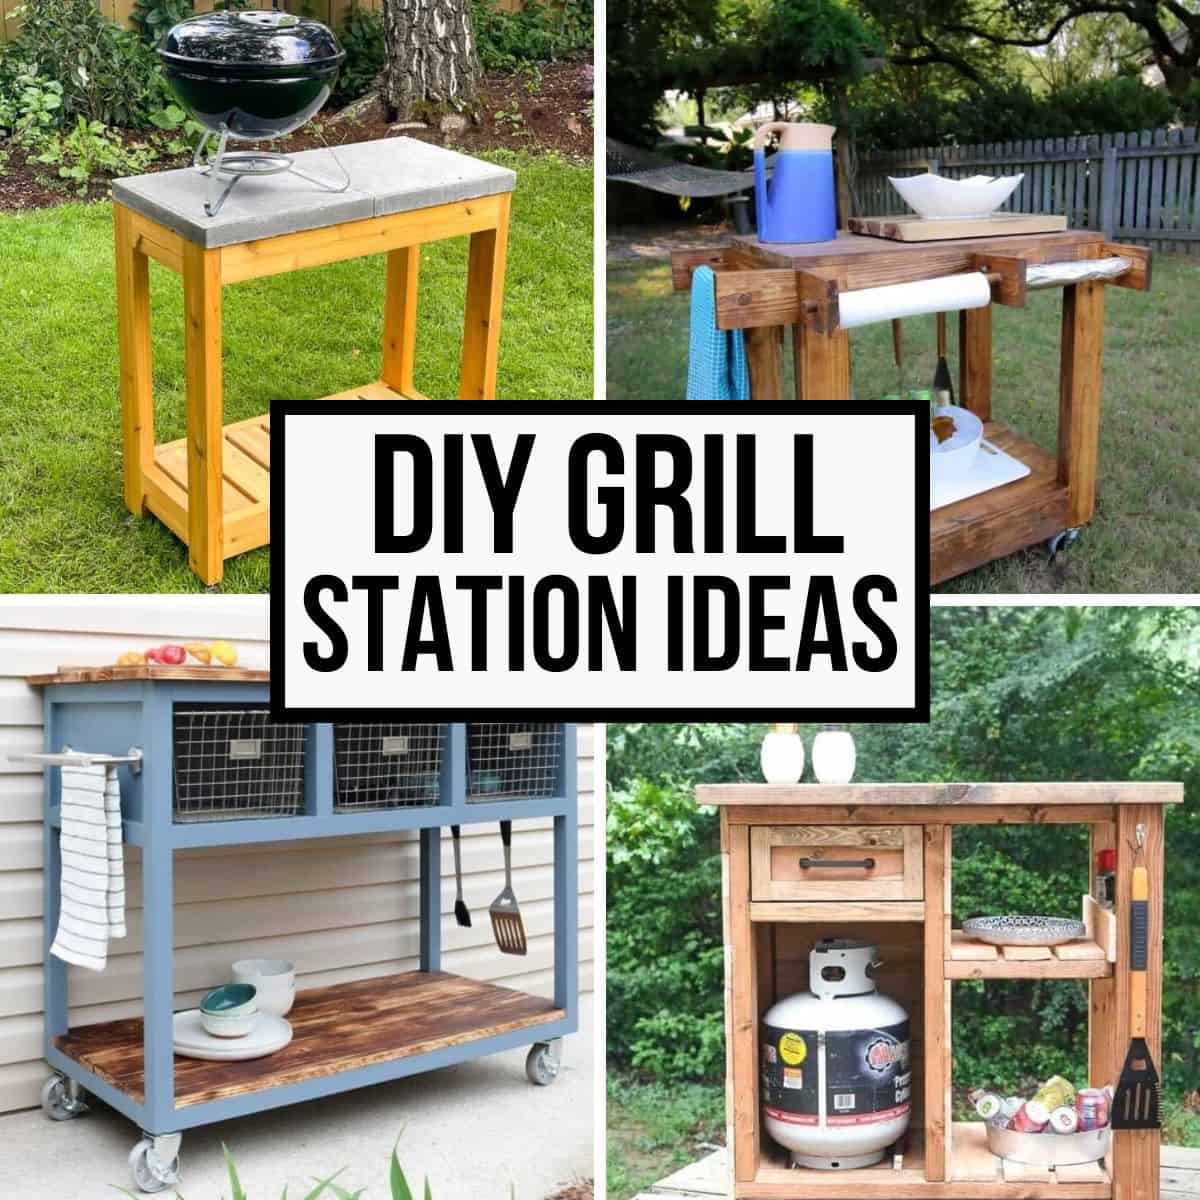 How To Make a DIY Grill Station - Home Improvement Projects to